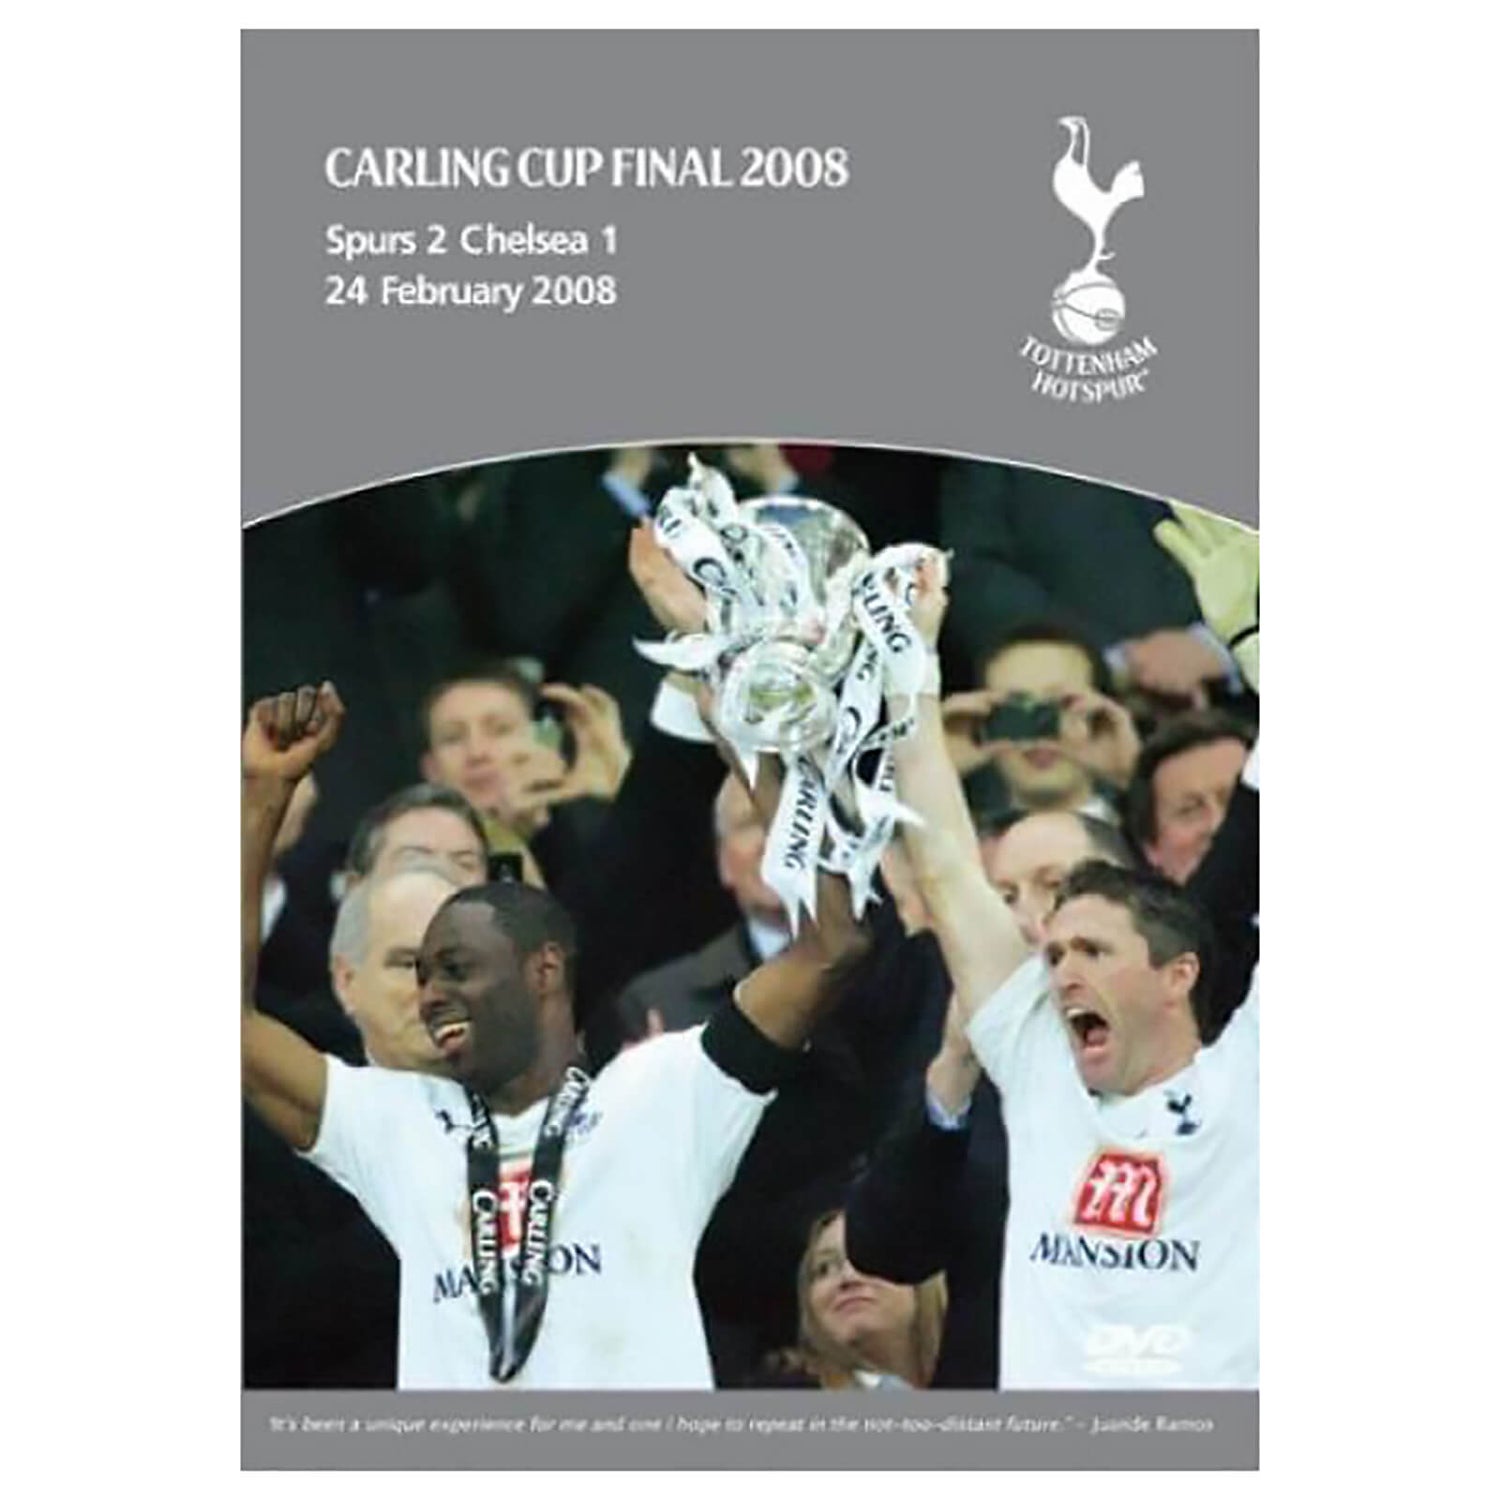 Carling Cup Final 2008